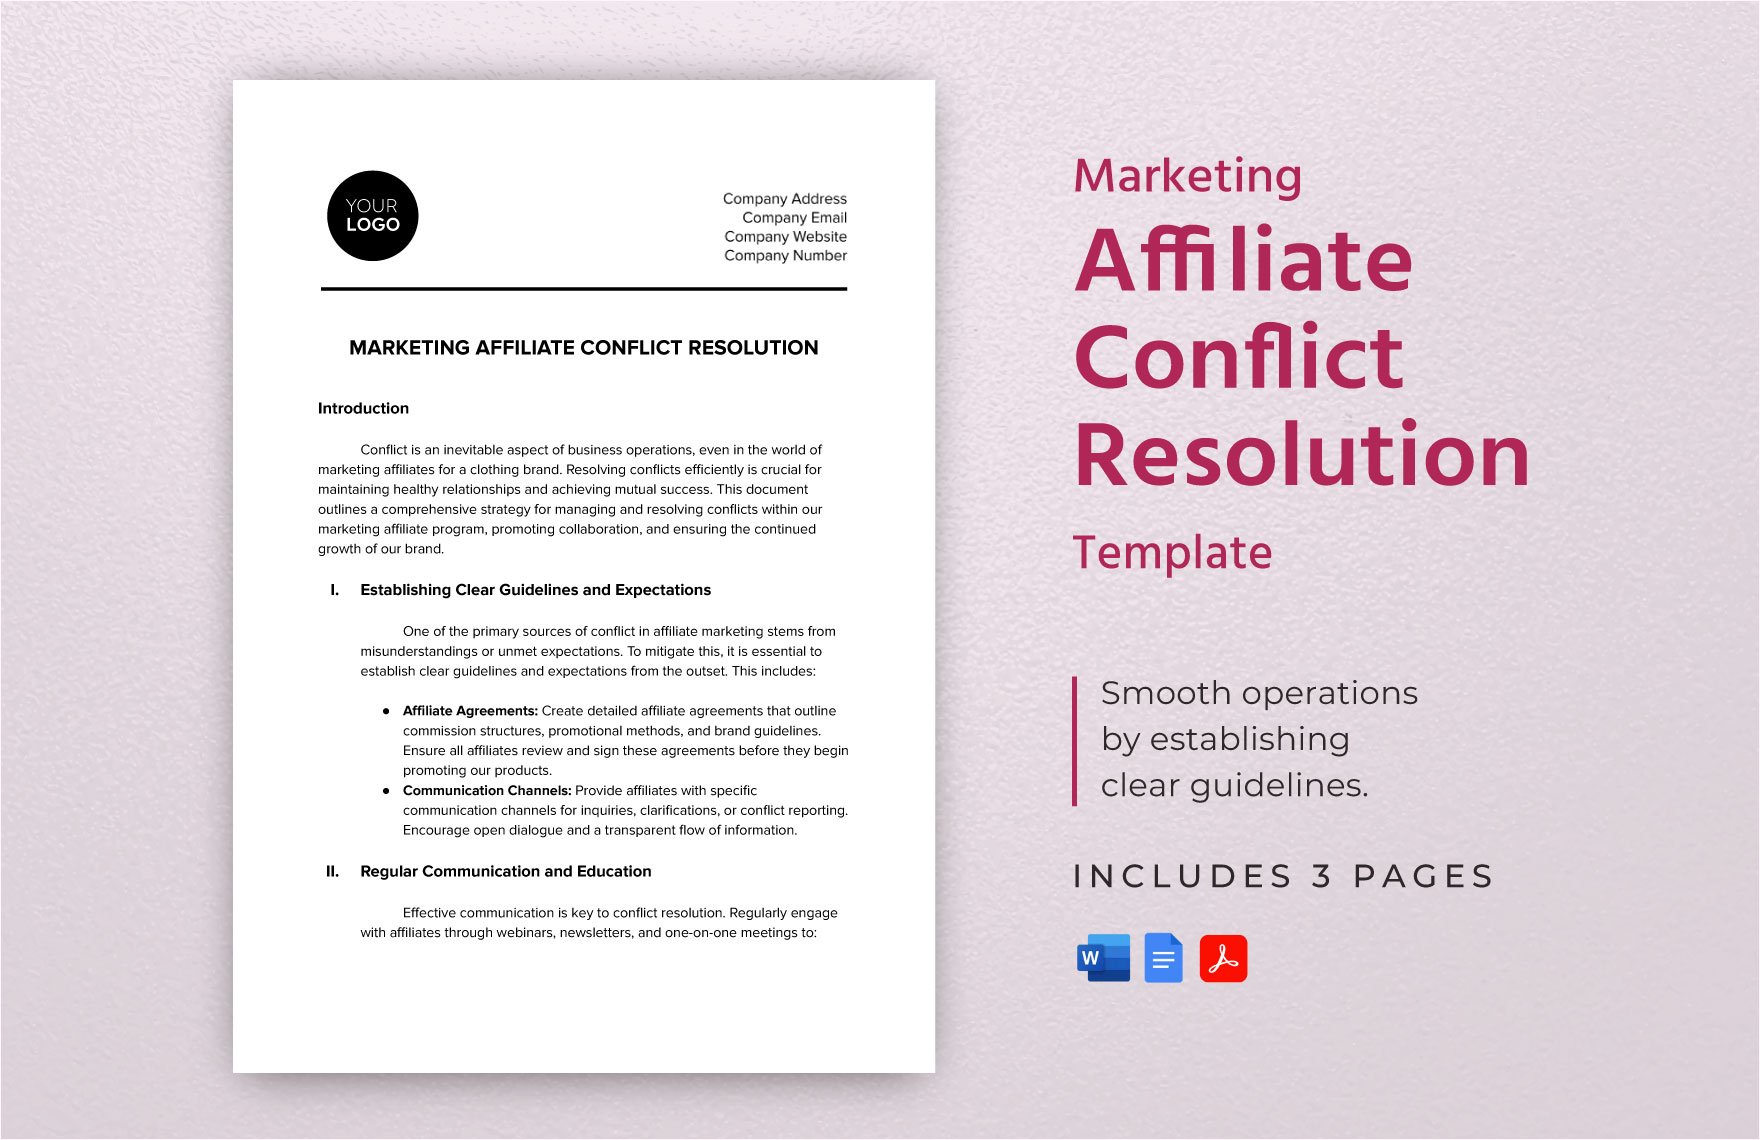 Marketing Affiliate Conflict Resolution Template